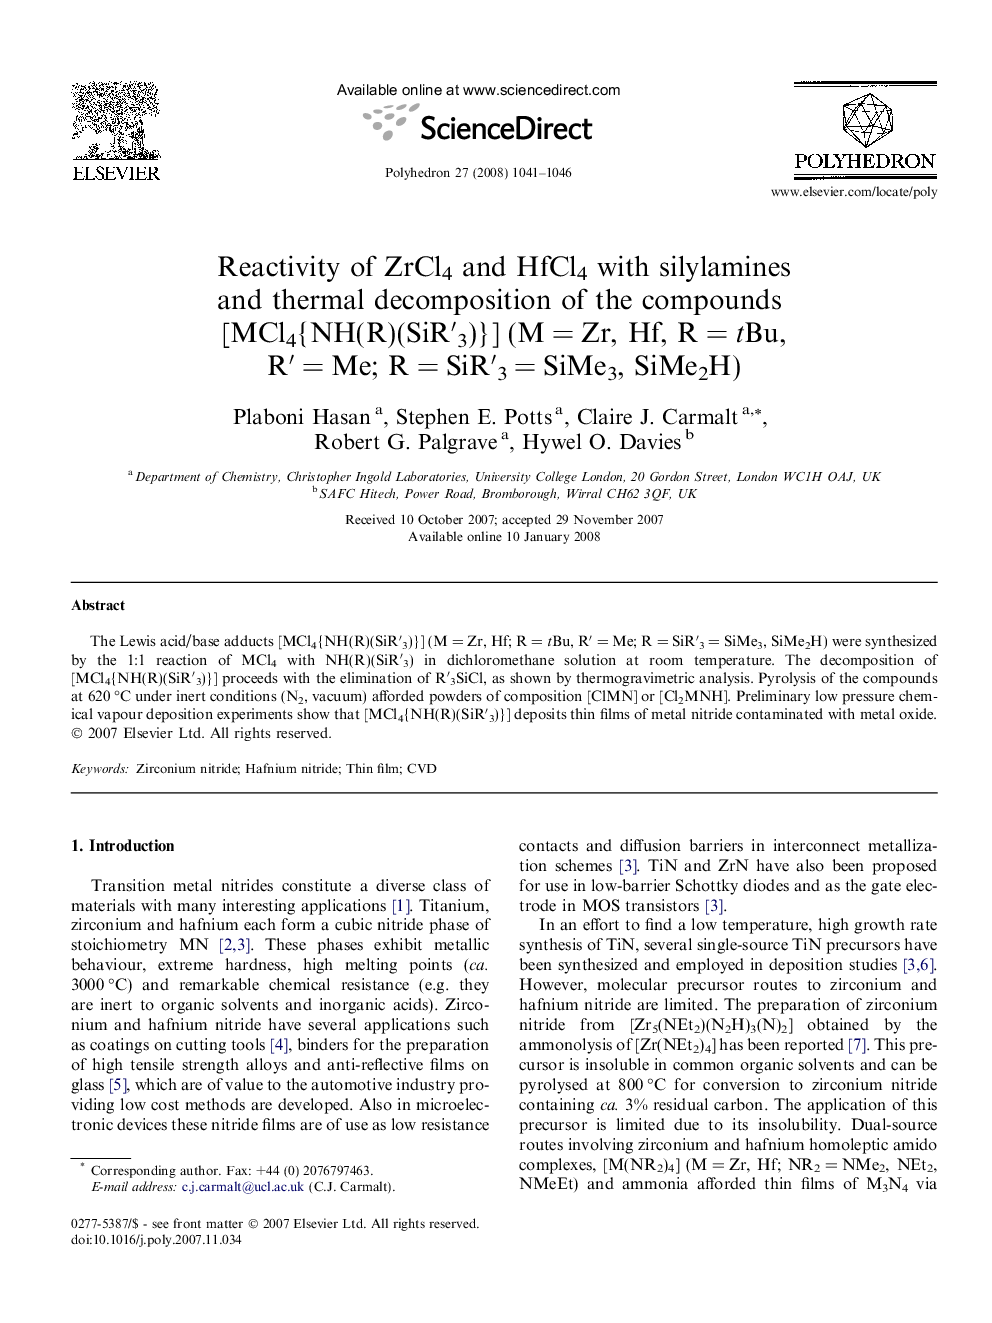 Reactivity of ZrCl4 and HfCl4 with silylamines and thermal decomposition of the compounds [MCl4{NH(R)(SiR′3)}] (M = Zr, Hf, R = tBu, R′ = Me; R = SiR′3 = SiMe3, SiMe2H)